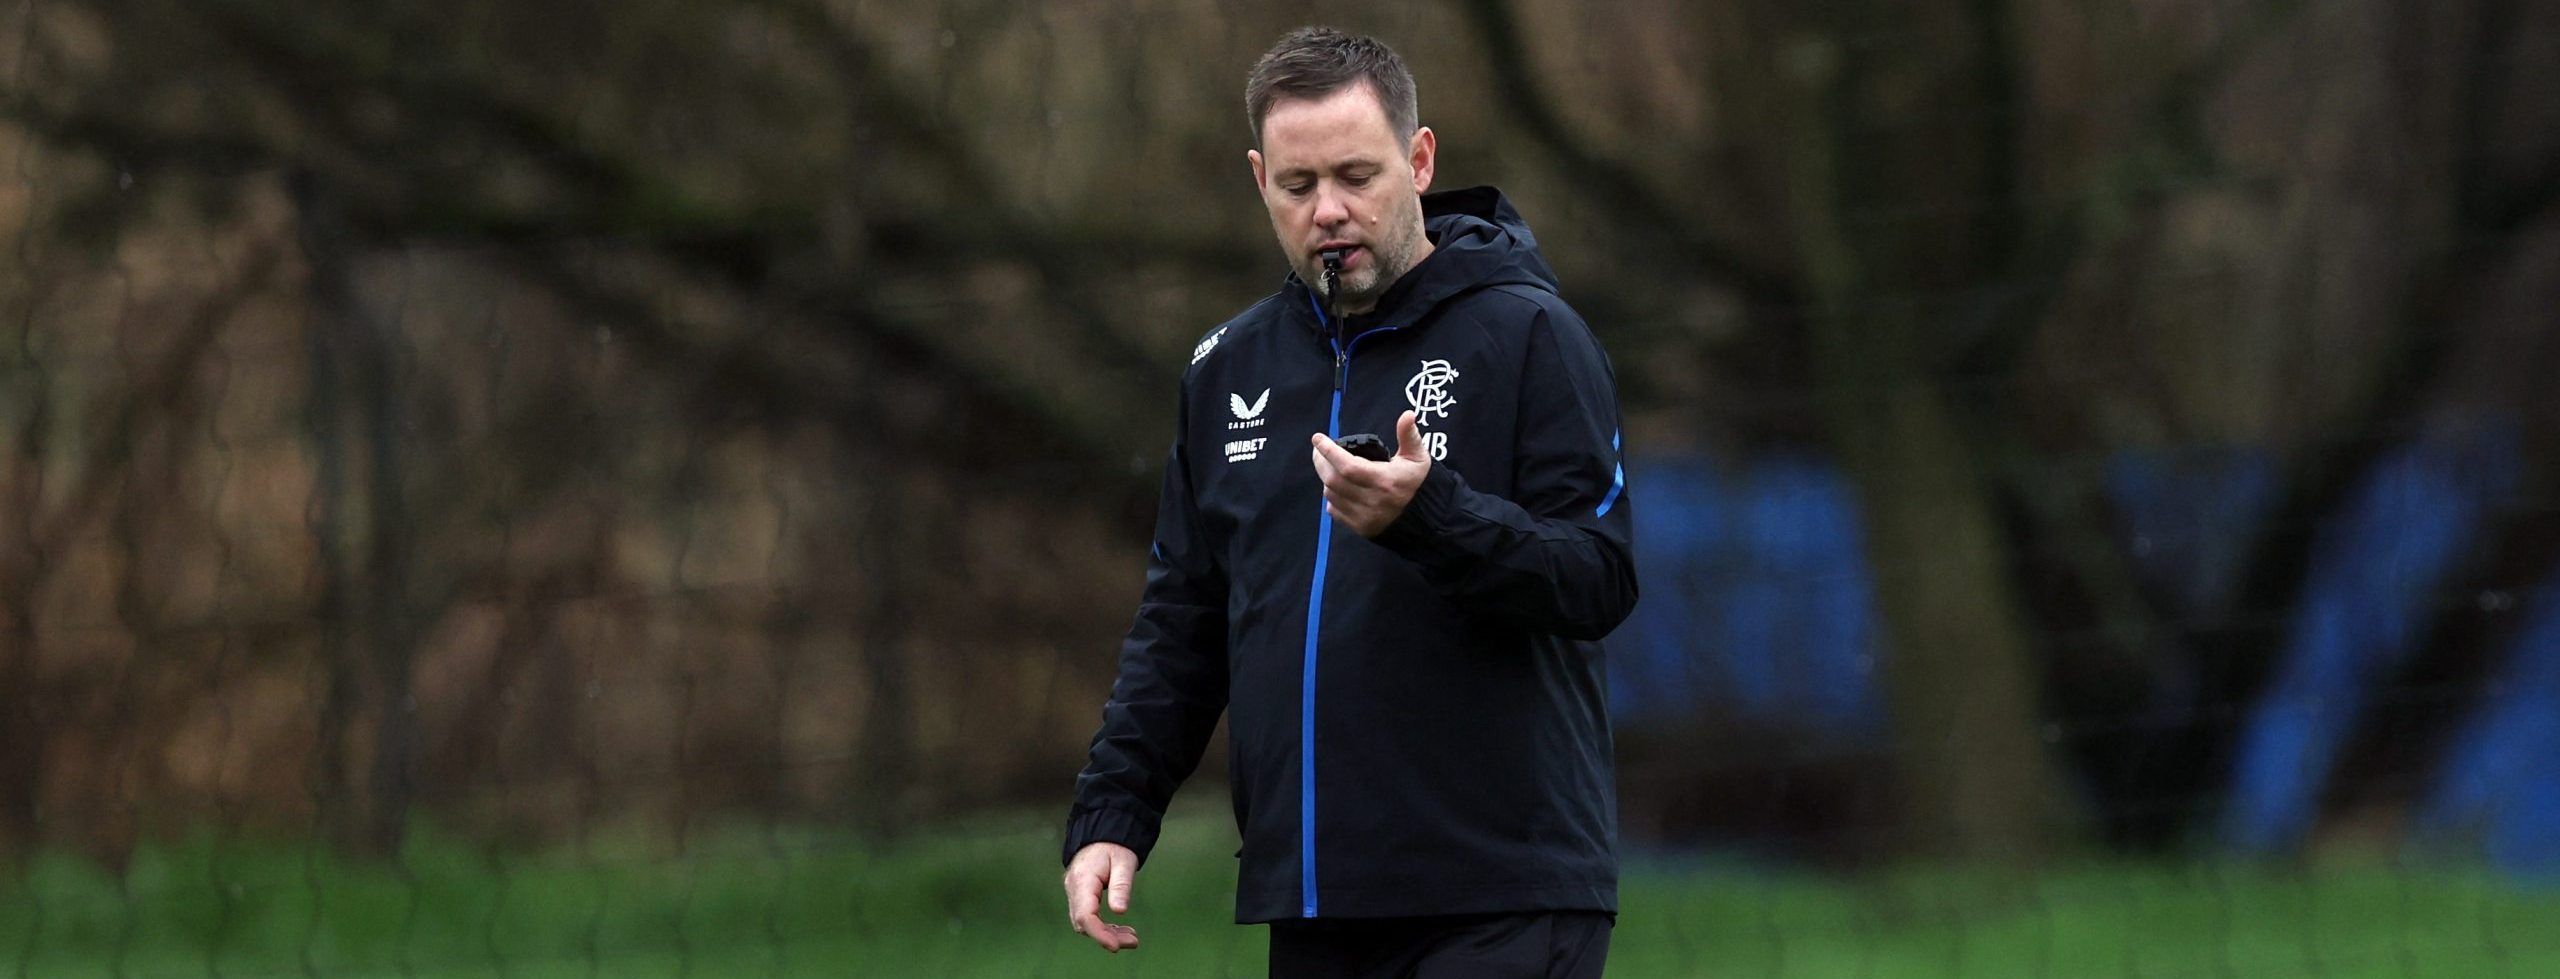 Soccer Football - Rangers Training with new manager Michael Beale - The Hummel Training Centre, Glasgow, Scotland, Britain - December 1, 2022 Newly appointed Rangers manager Michael Beale during training REUTERS/Russell Cheyne